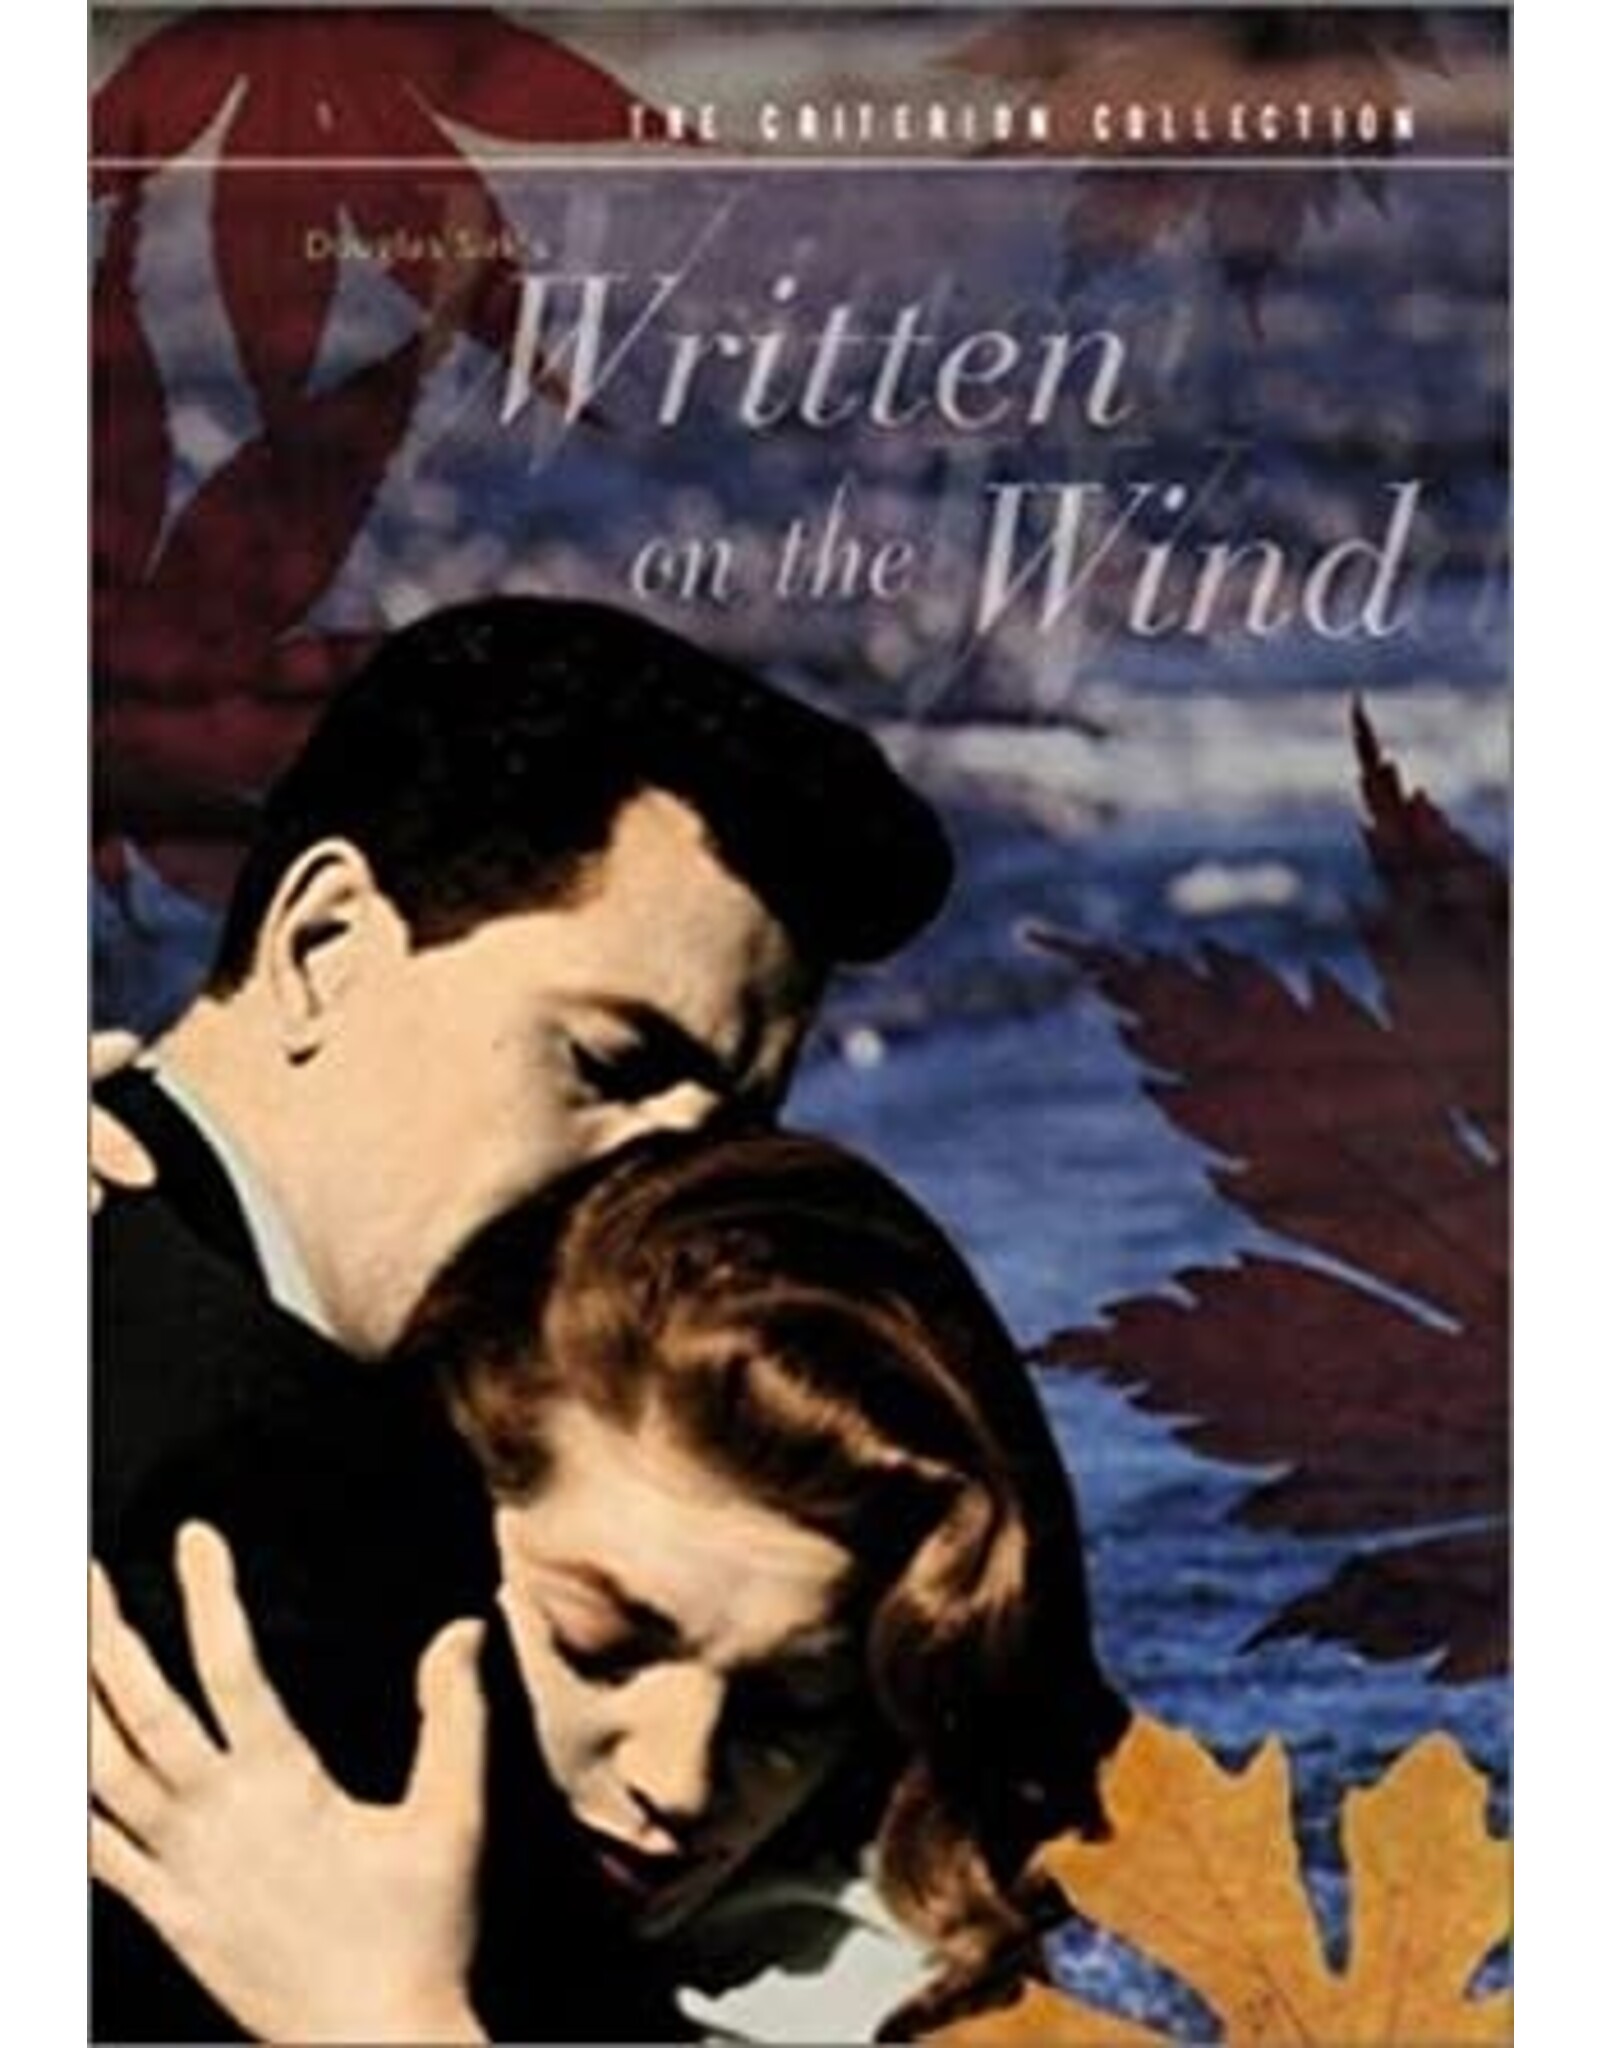 Criterion Collection Written on the Wind - Criterion Collection (Used)